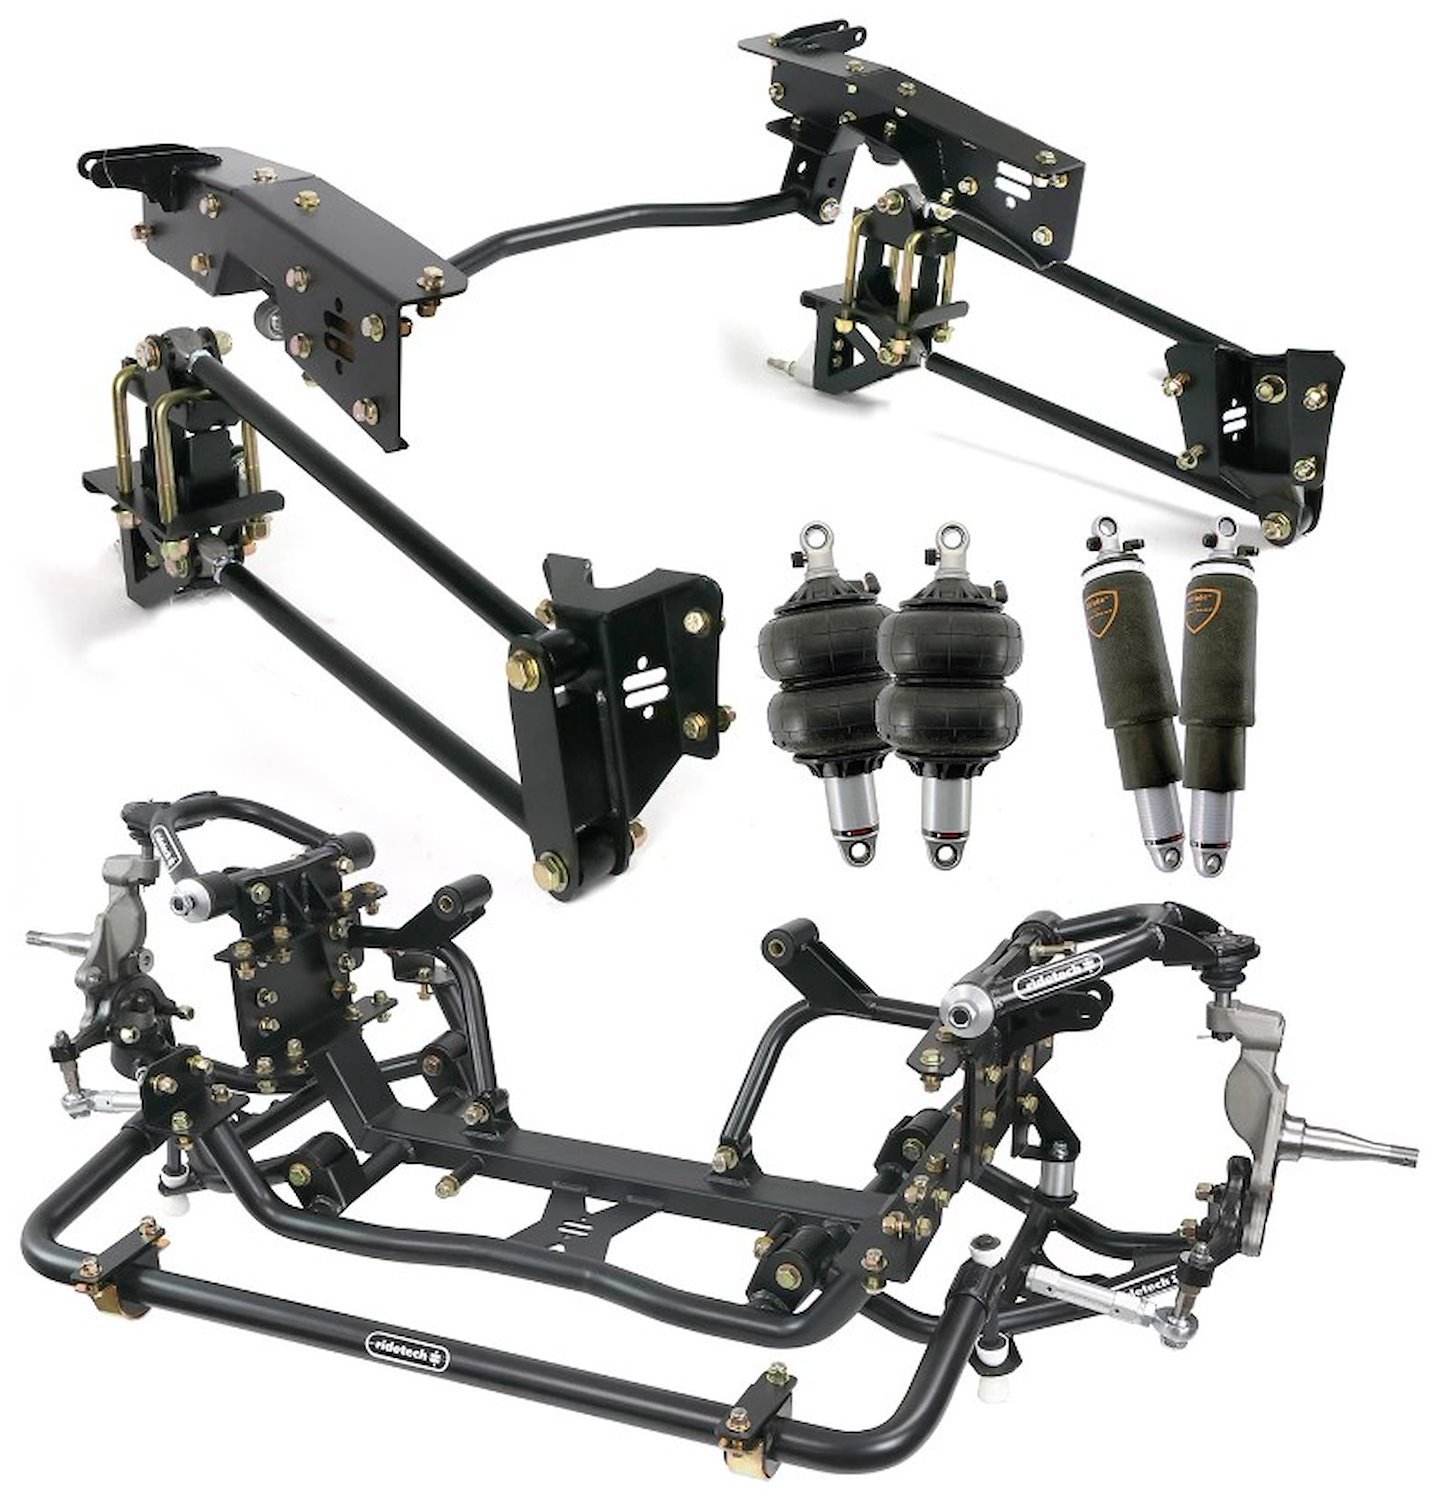 Complete Suspension System w/Shockwave Air Ride for 1973-1979 Ford F-100, F-150 Trucks 2WD